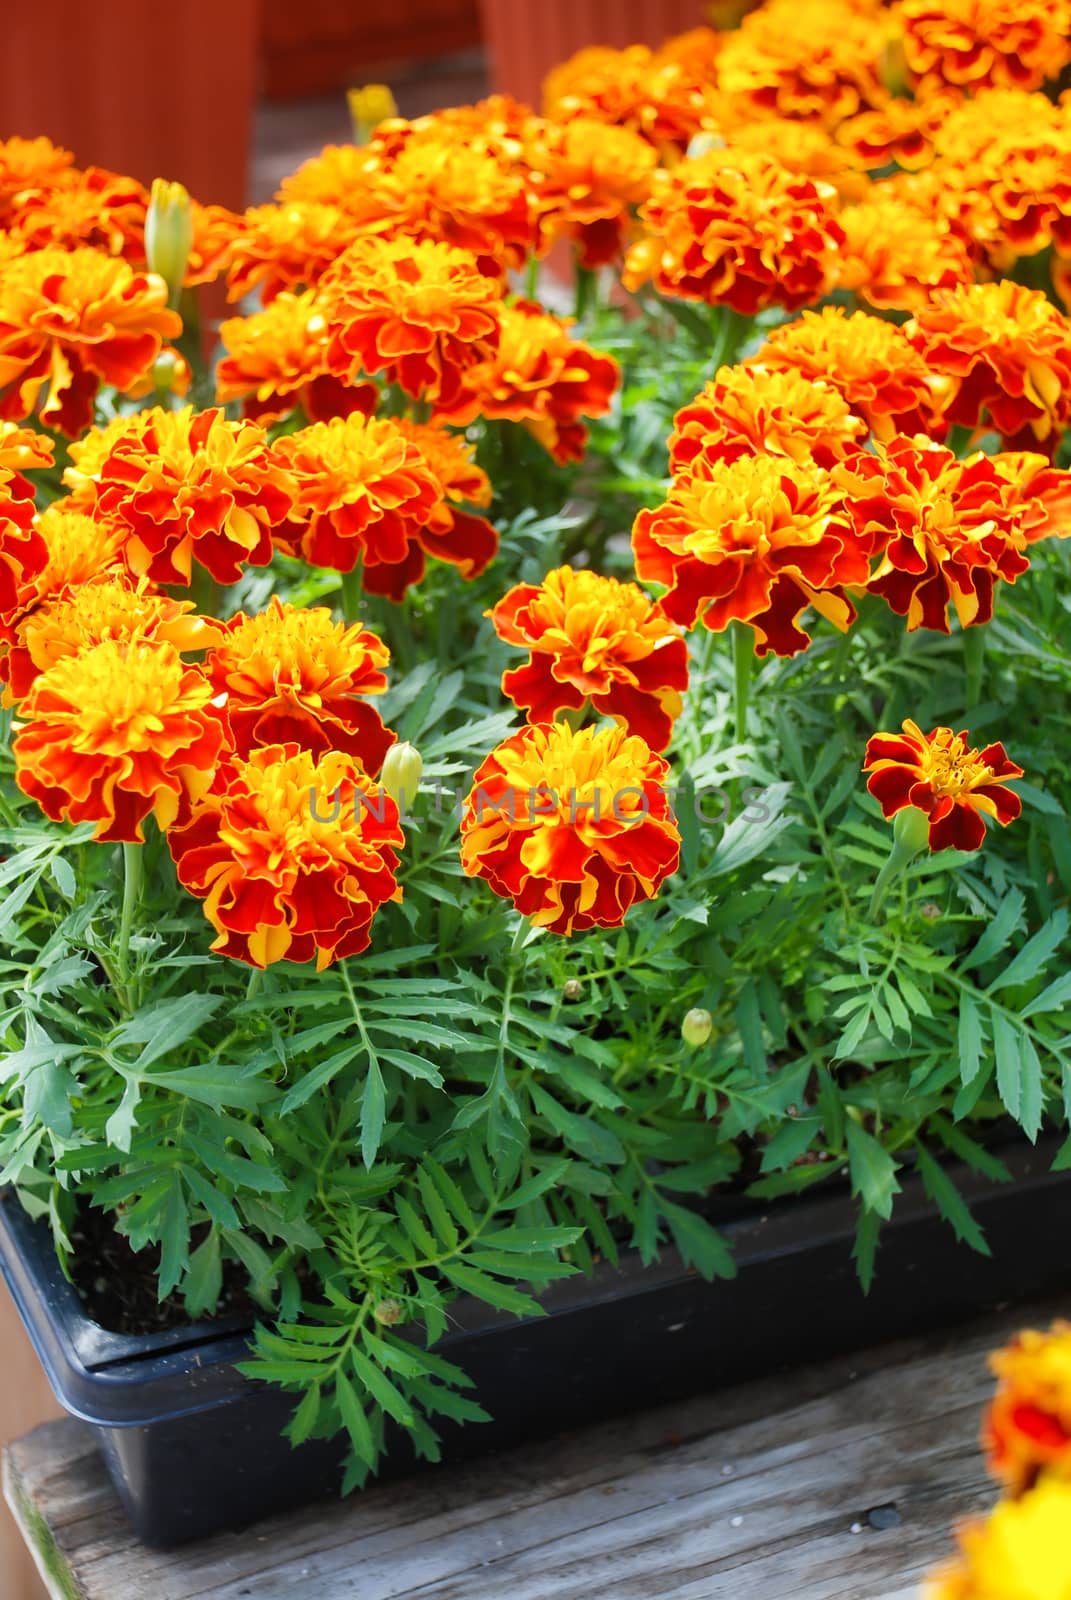 Tagetes patula French marigold in bloom, orange yellow flowers, green leaves, pot plant